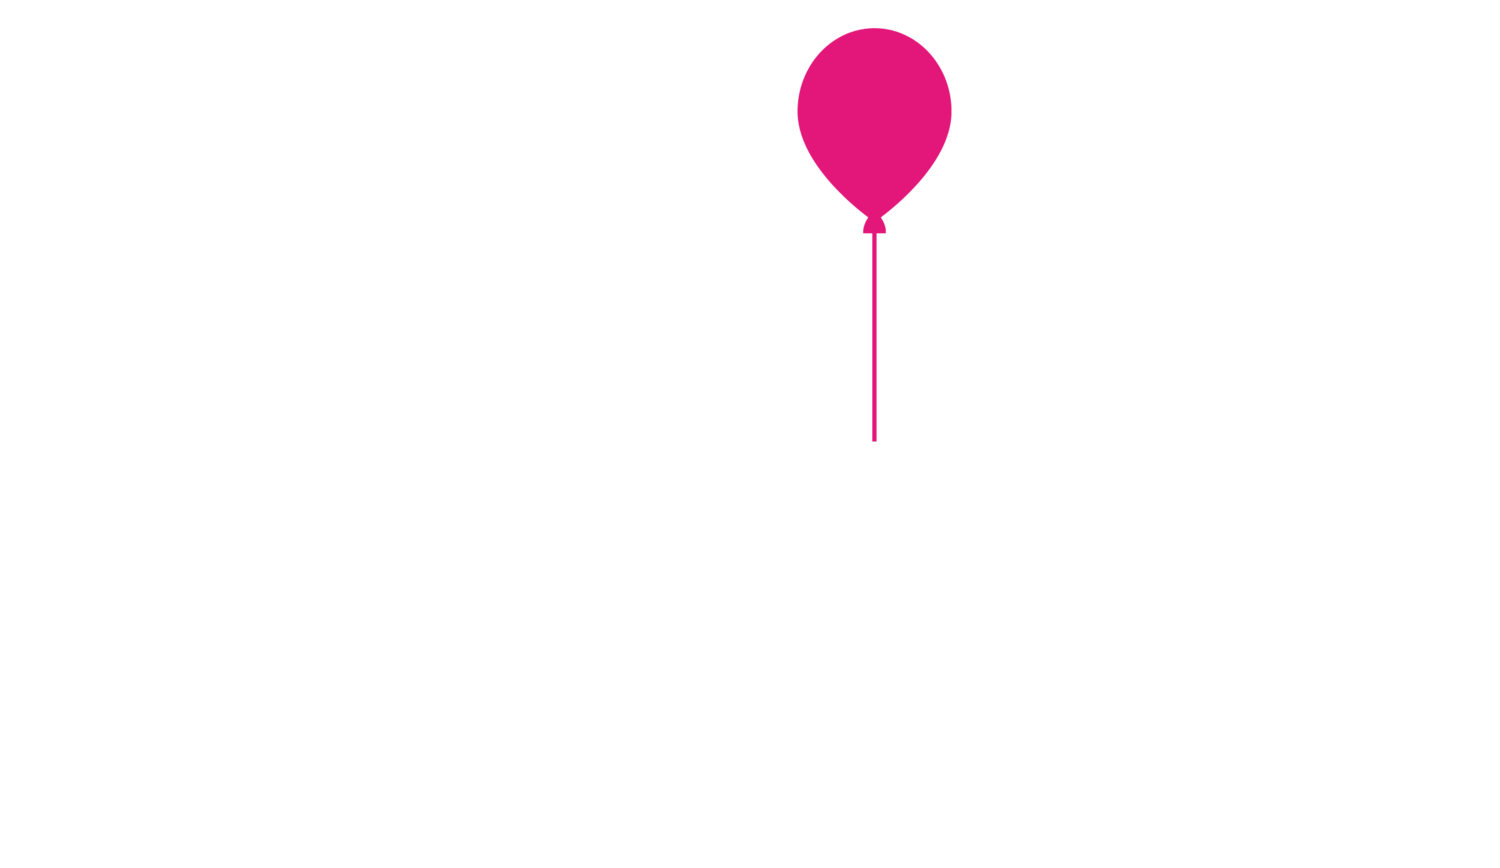 Little miss . Teen clipart welcome party